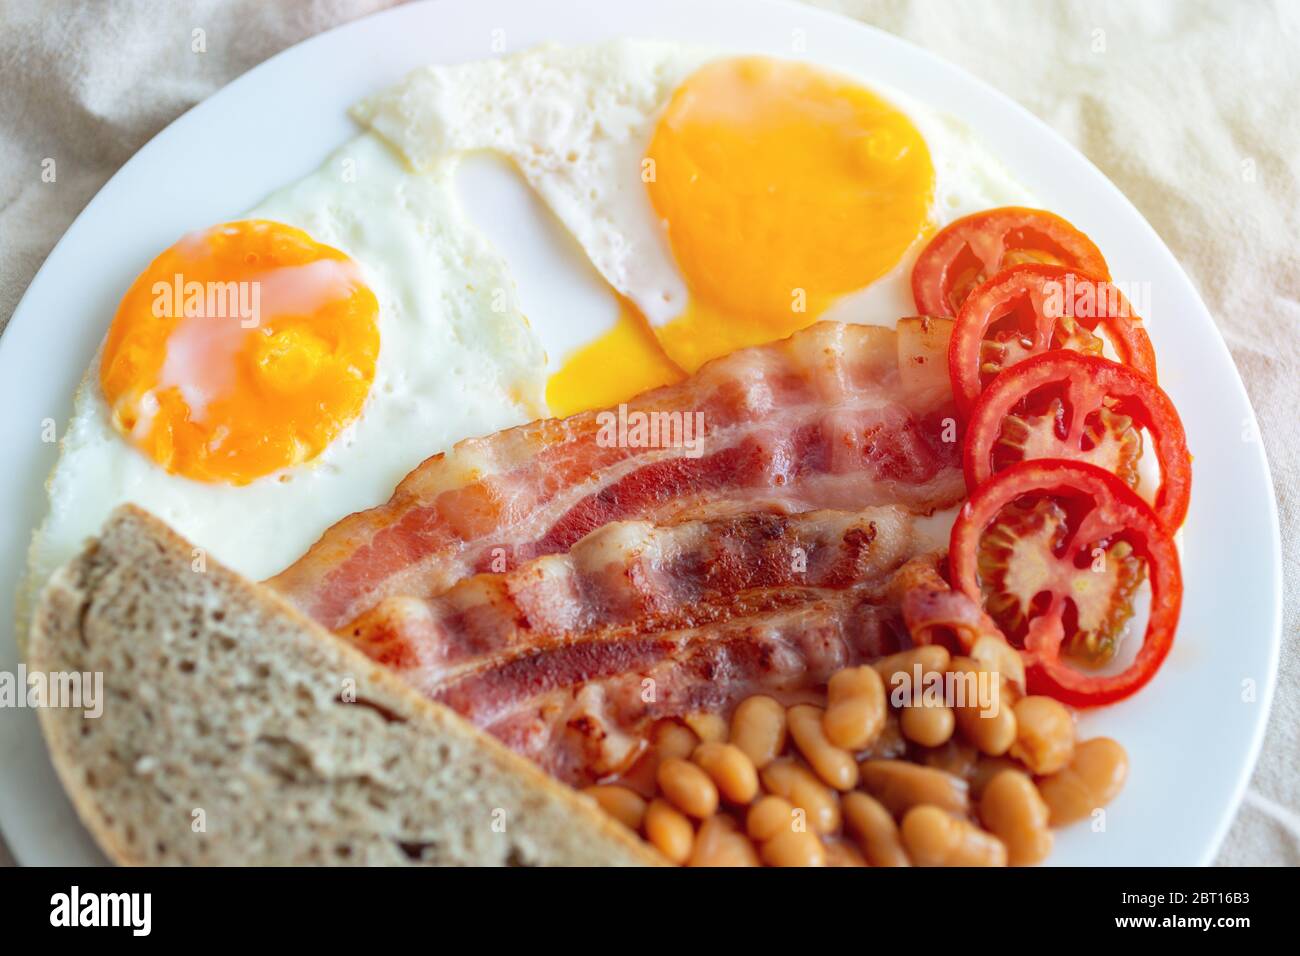 Close up of traditional English breakfast: fried eggs, bacon, beans, toast bread and tomato on a plate. Stock Photo